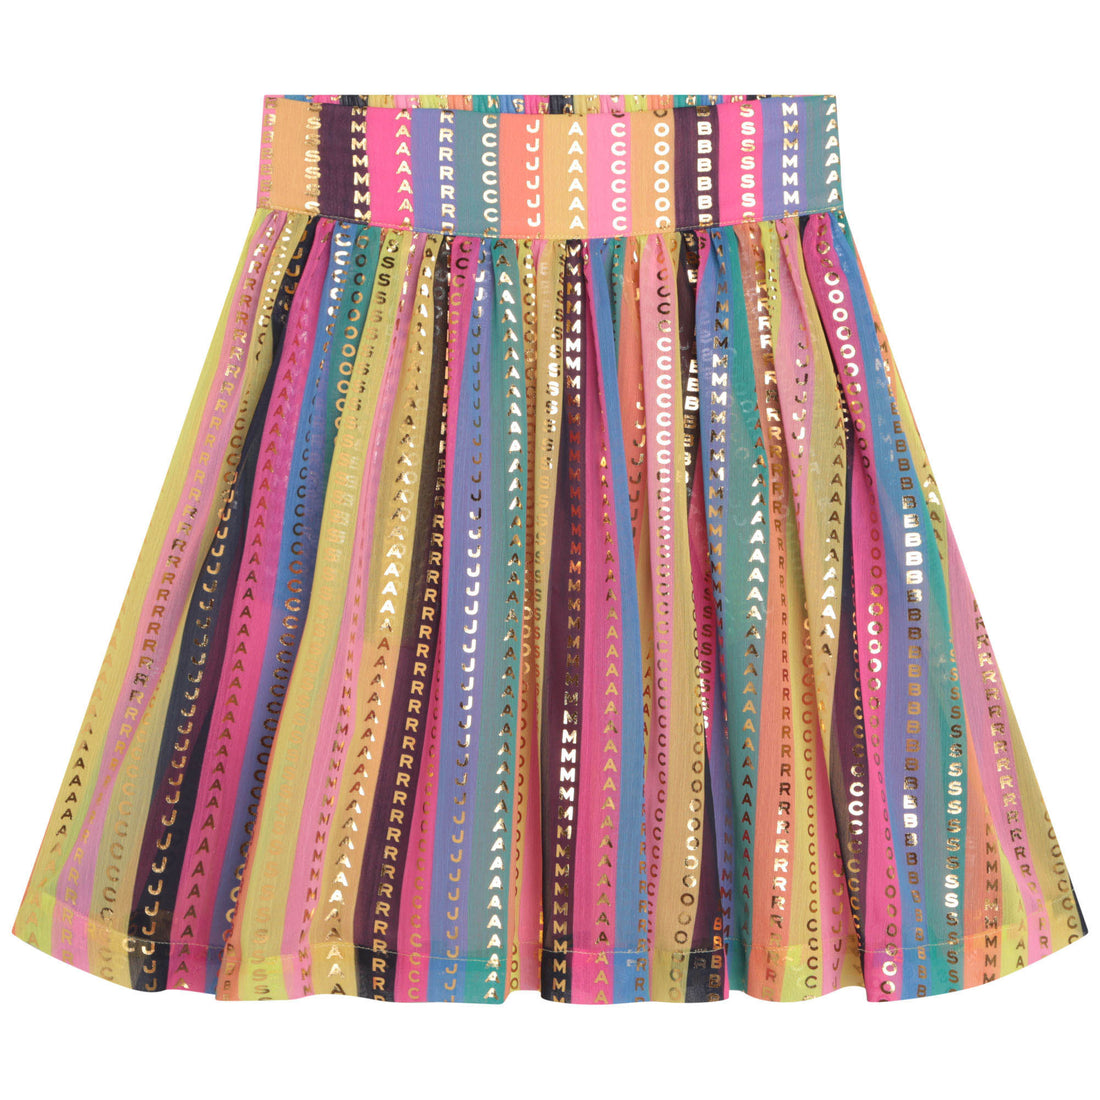 Marc Jacobs Pleated Skirt Style: W13133